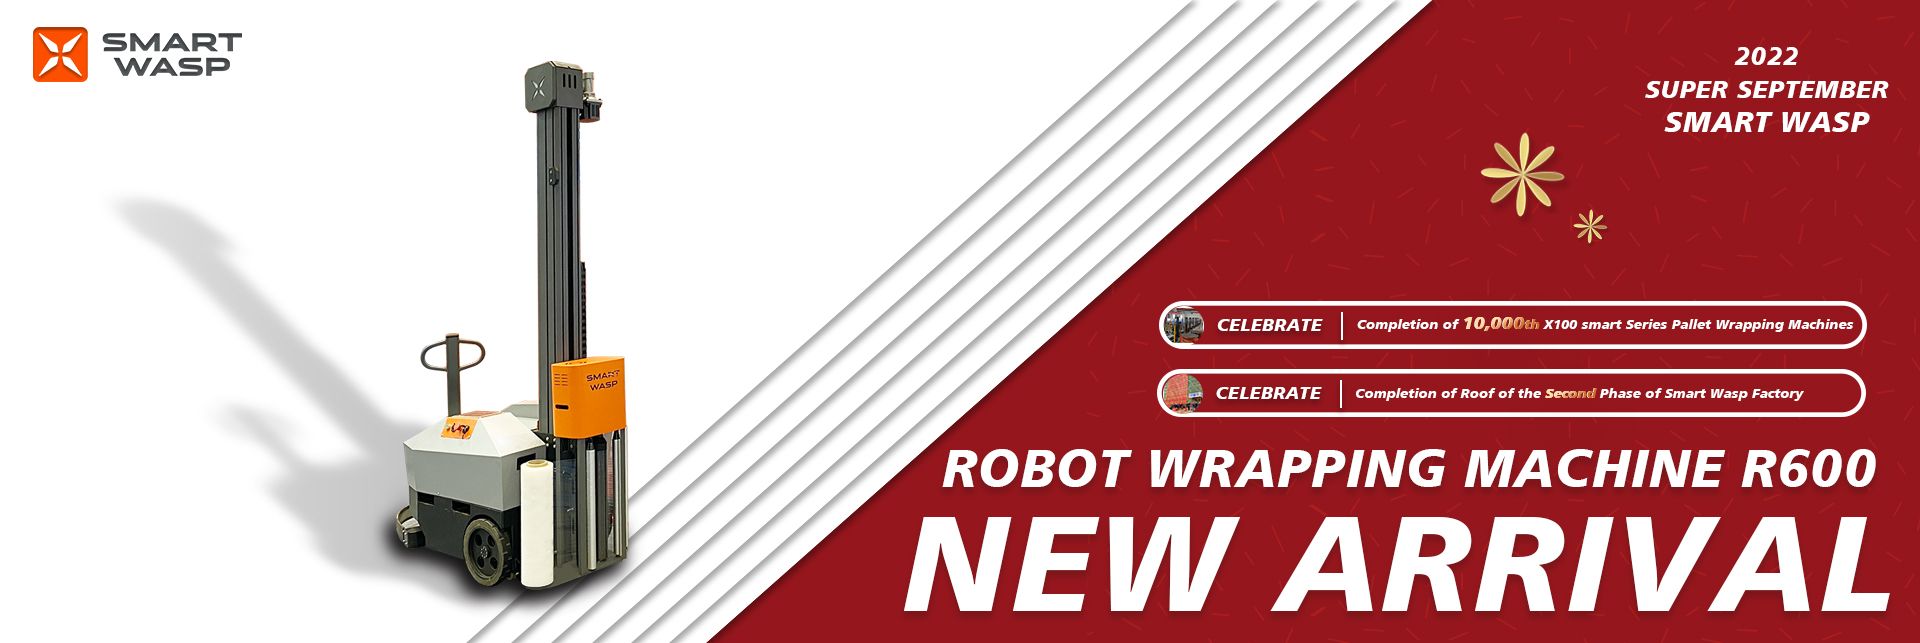 new arrival robot 643